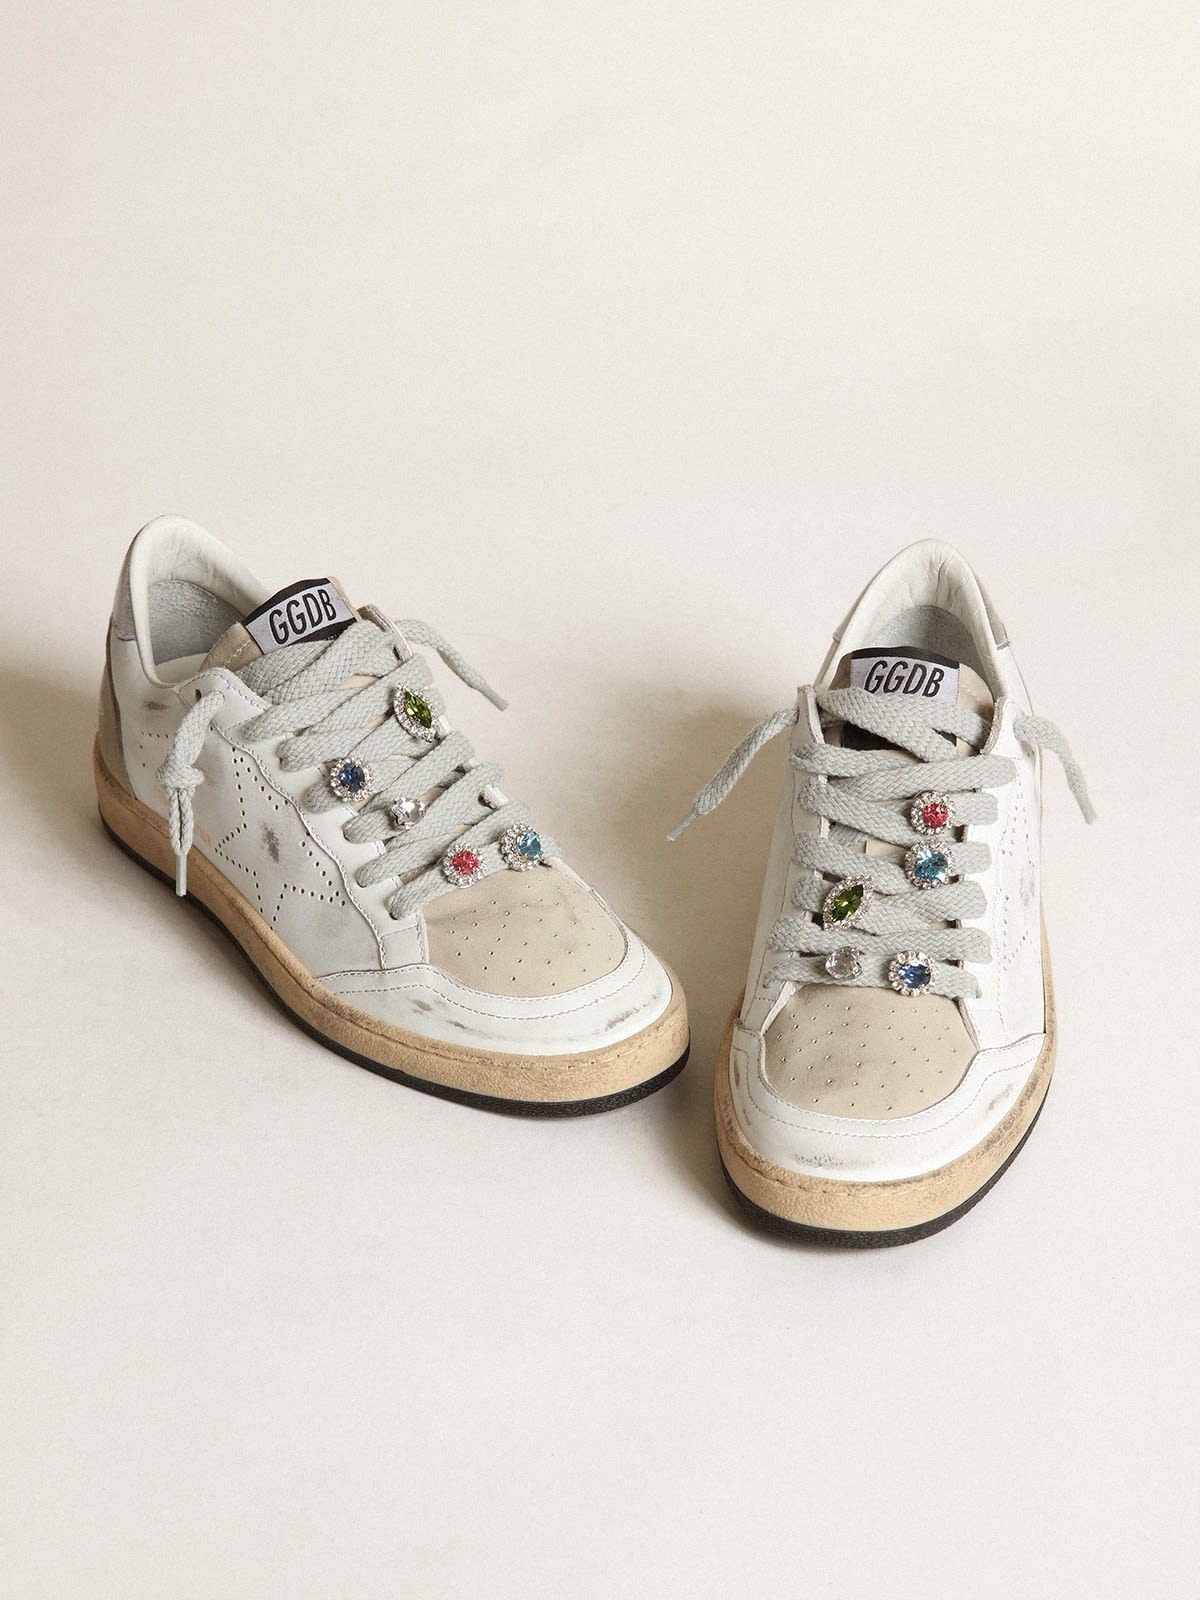 Ball Star LAB sneakers in white leather with perforated star and lace accessories with multicolored  - 2